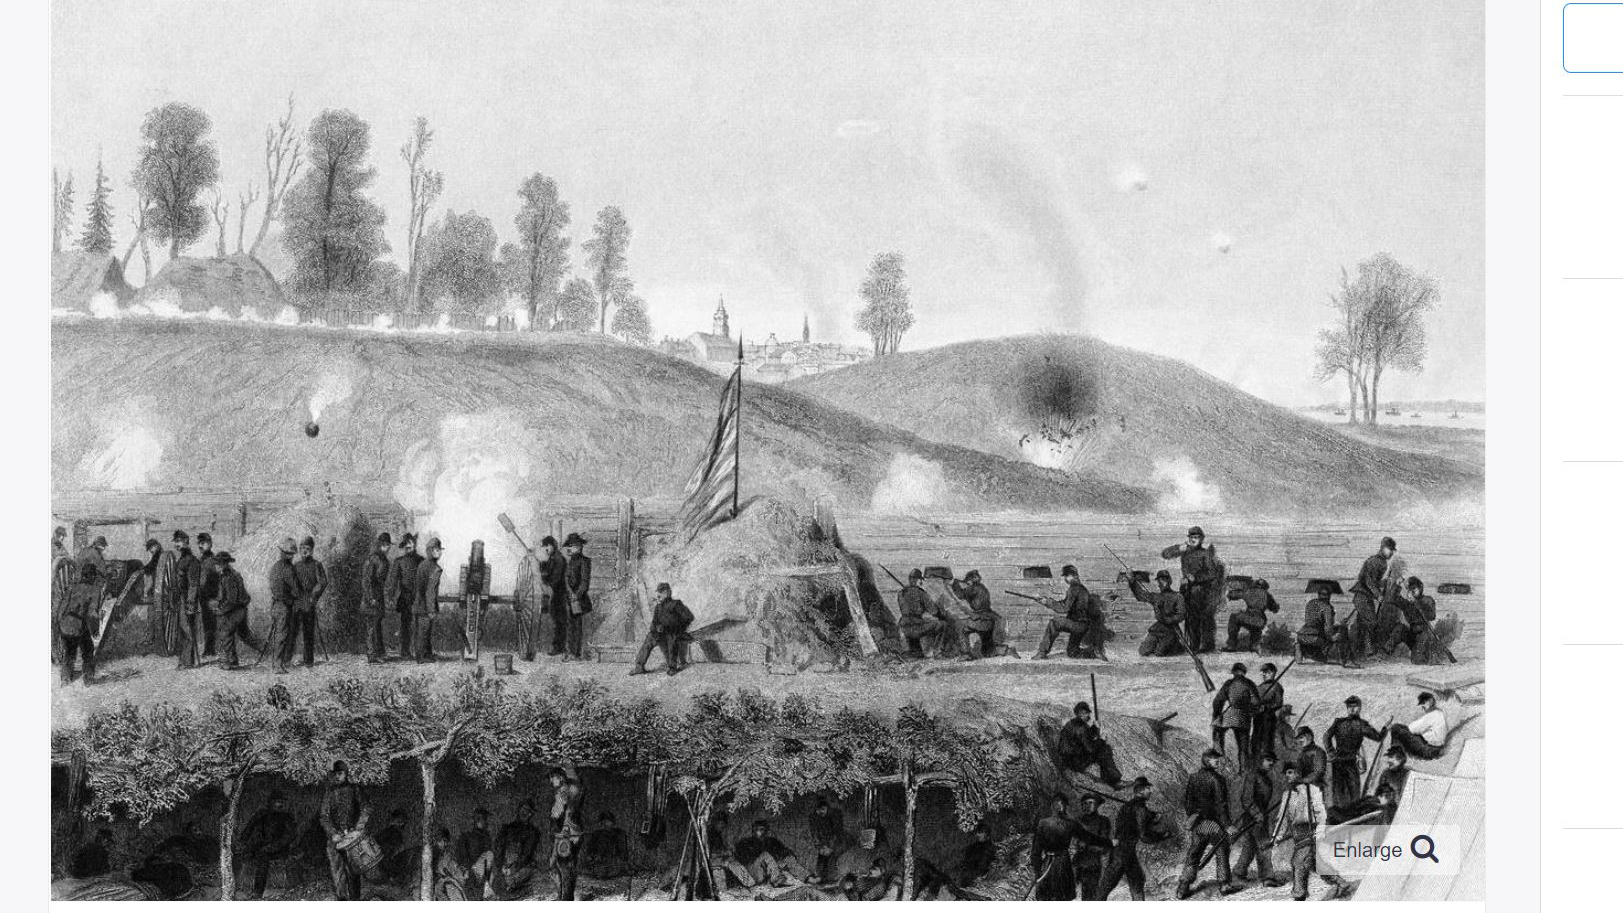 Union forces in the siege lines around Vicksburg. with sappers preparing tunnels and batteries bombarding the Confederate works. (ClassicStock/Alamy Stock Photo)